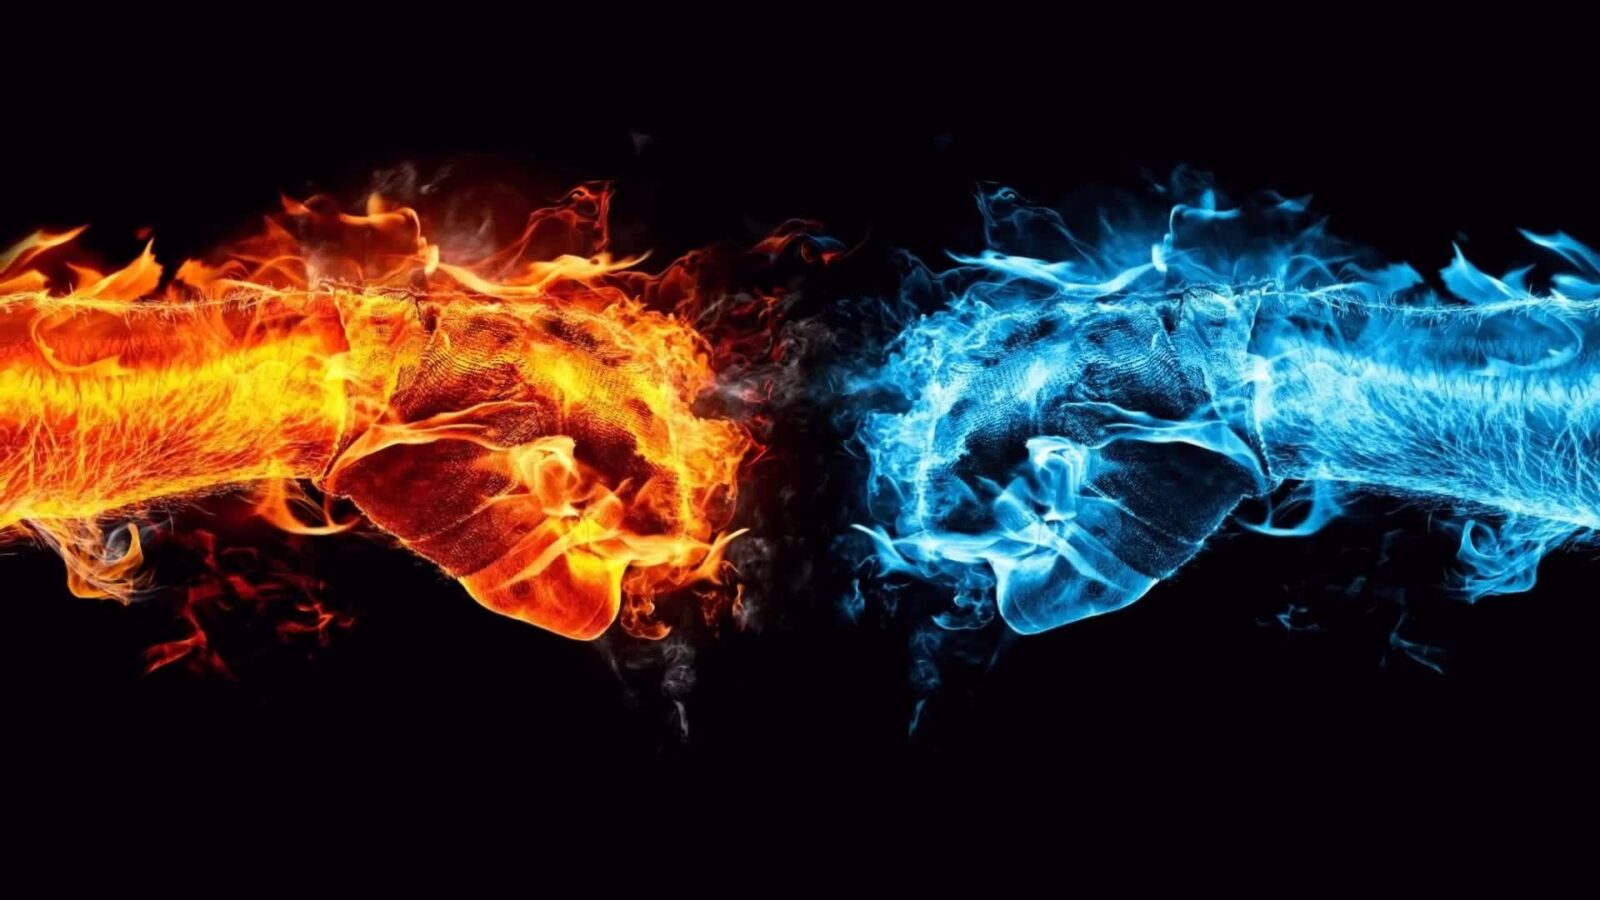 LiveWallpapers4Free.com | Red Fist vs Blue Fist or Flame vs Ice - Free Live Wallpaper